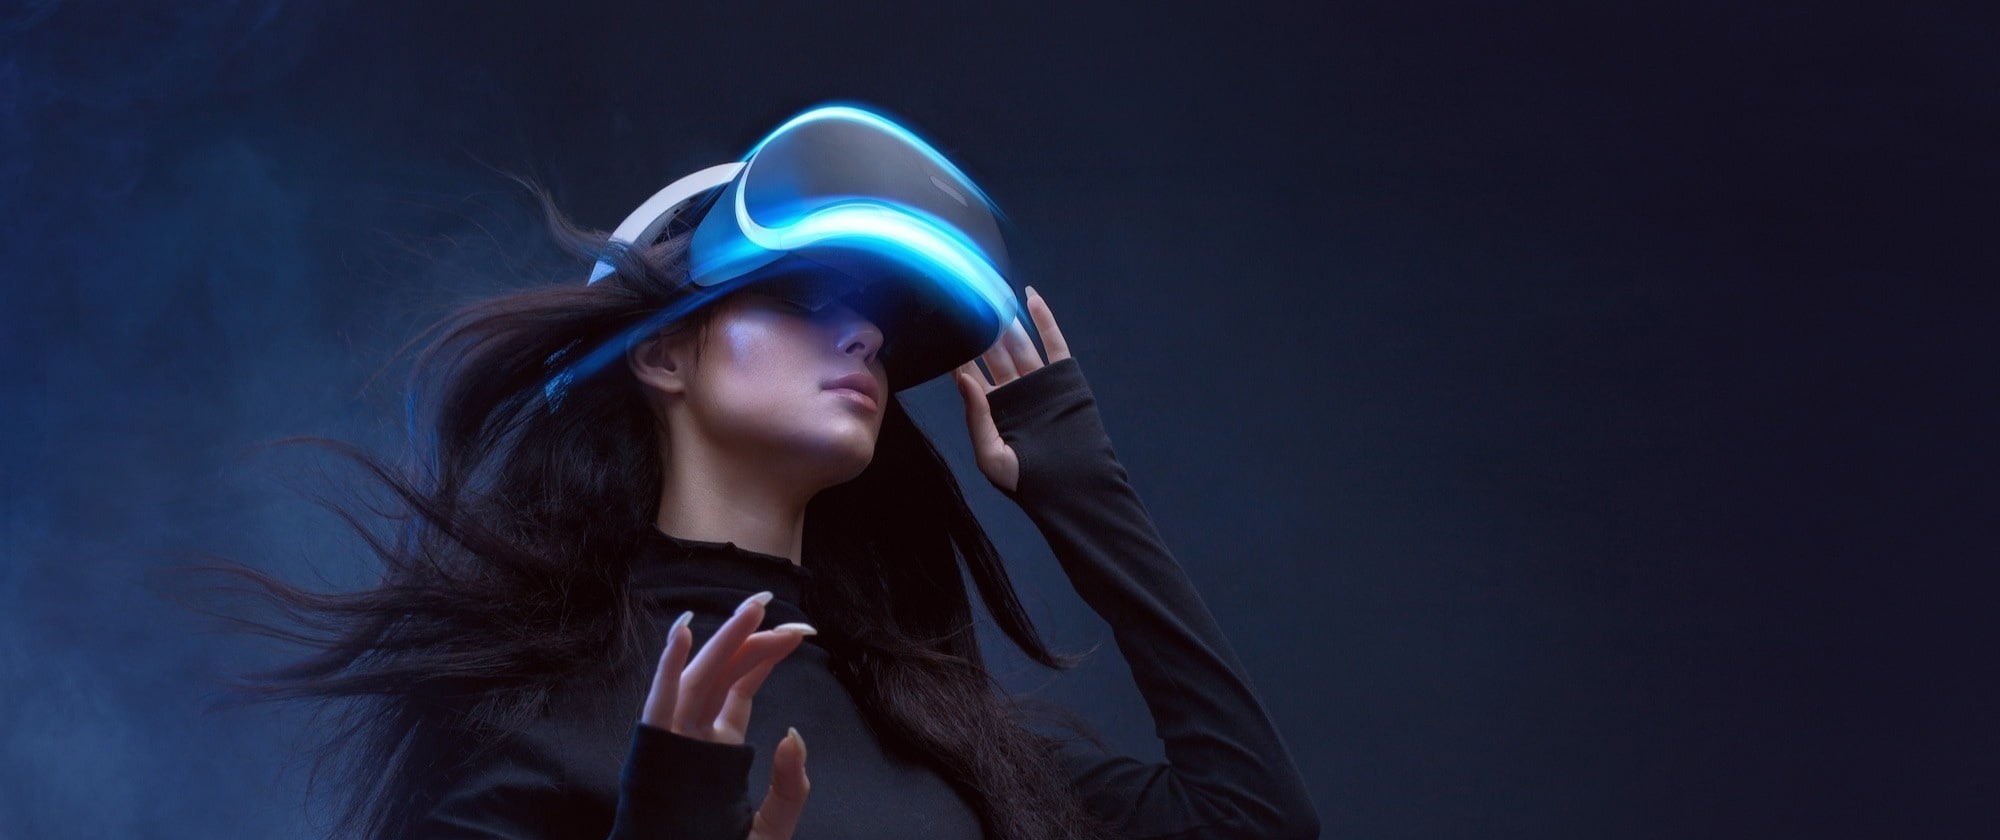 Exploring new realities: a woman immersed in a virtual world through vr technology.